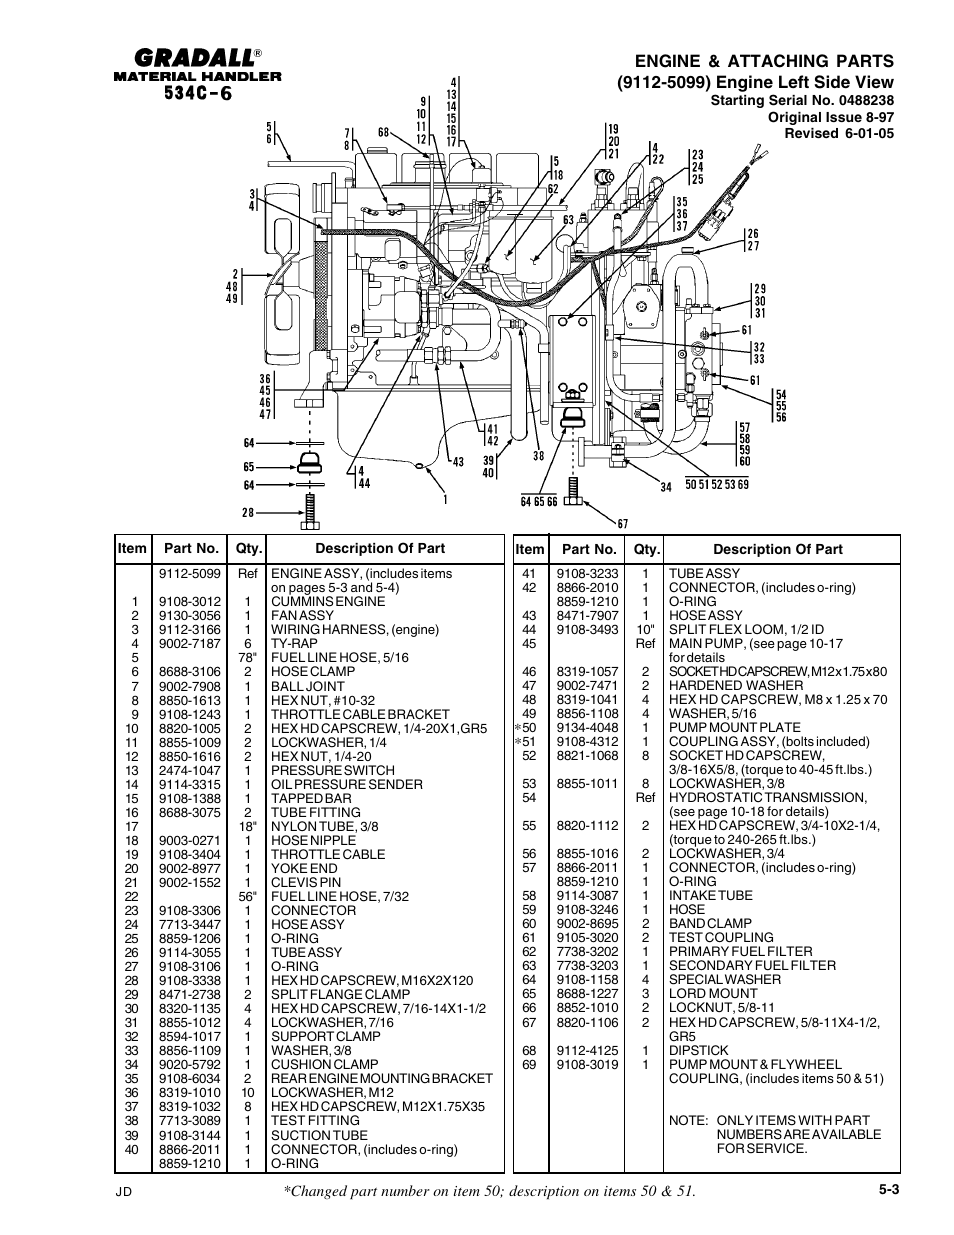 Gradall 534C-6 Parts Manual User Manual | Page 70 / 380 | Also for